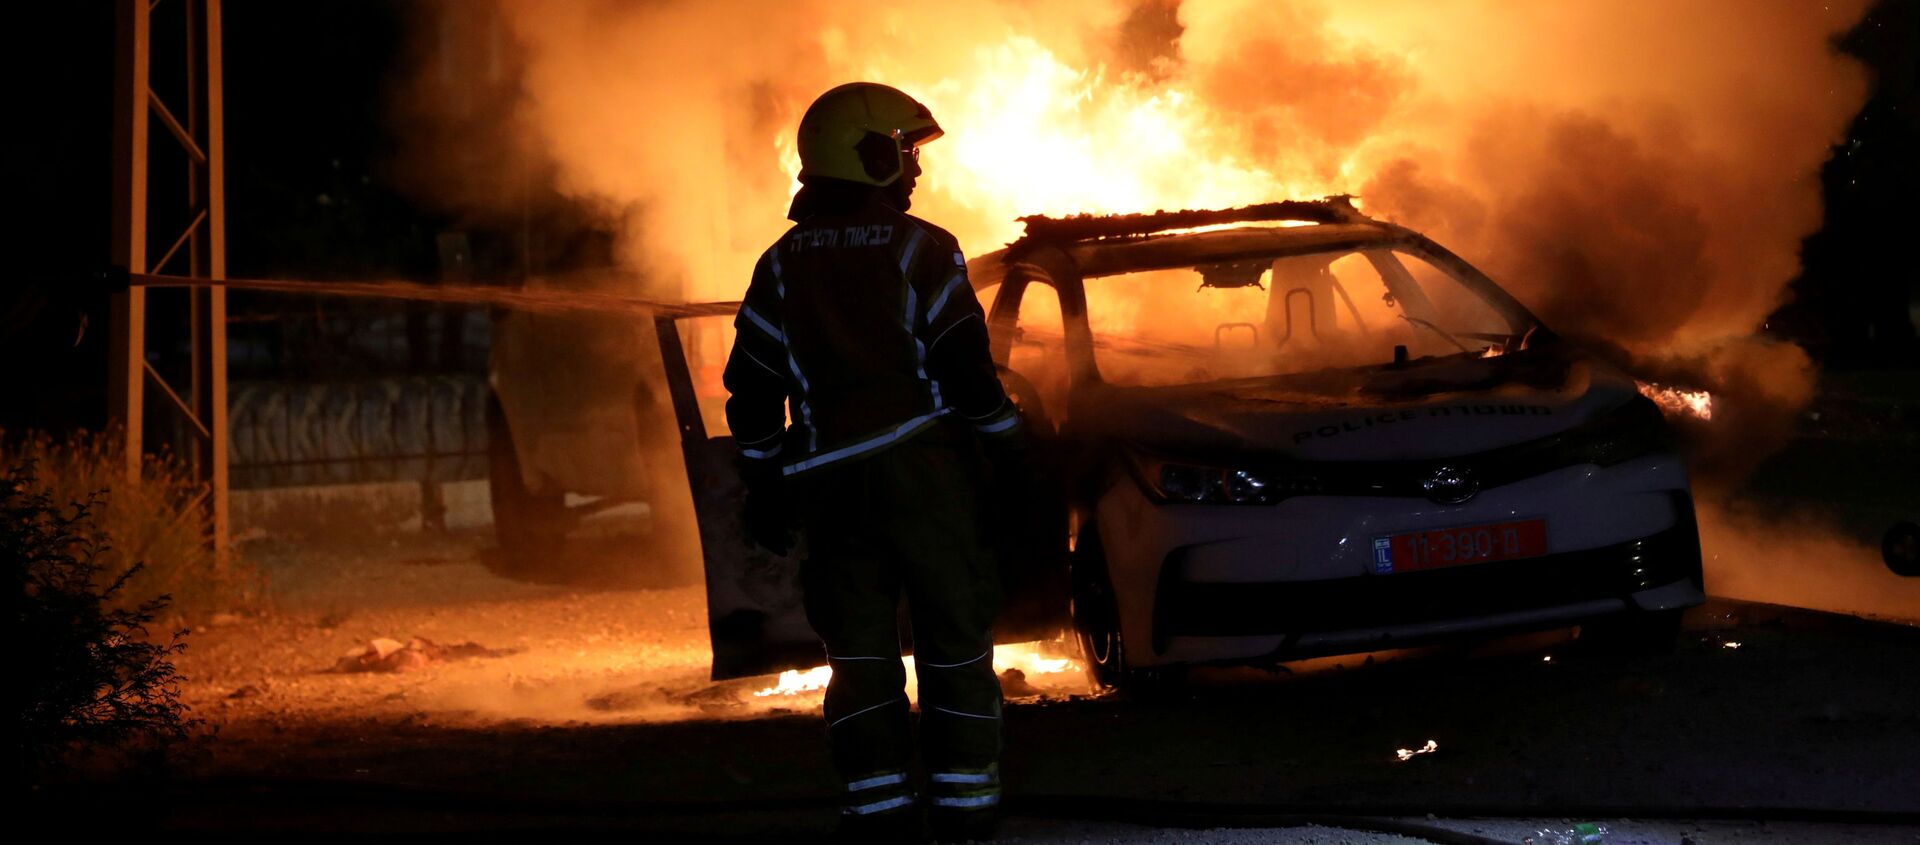 An Israeli firefighter stands near a burning Israeli police car during clashes between Israeli police and members of the country's Arab minority in the Arab-Jewish town of Lod, Israel May 12, 2021 - Sputnik International, 1920, 30.05.2021